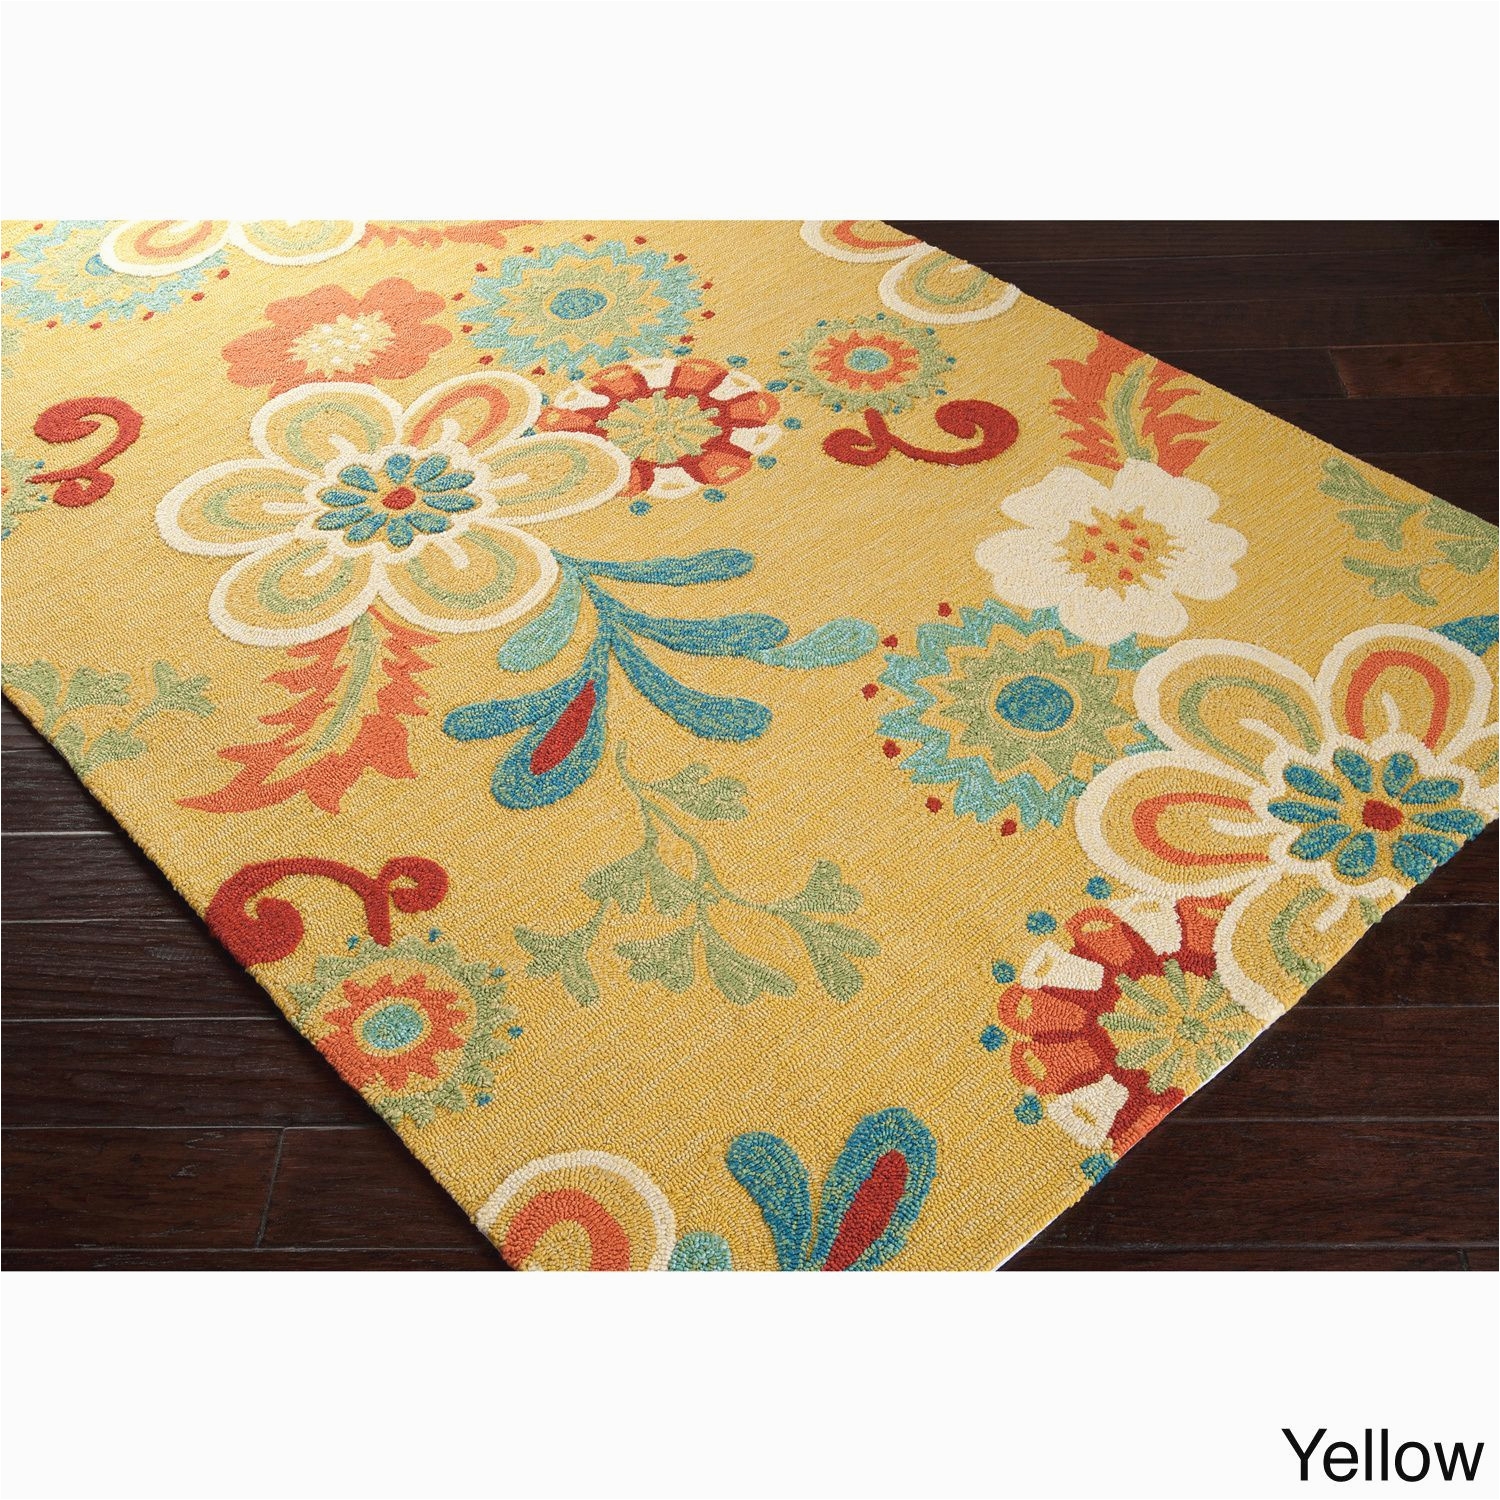 floor cheap outdoor rugs 8x10 awesome hand hooked kim transitional floral indoor outdoor area rug